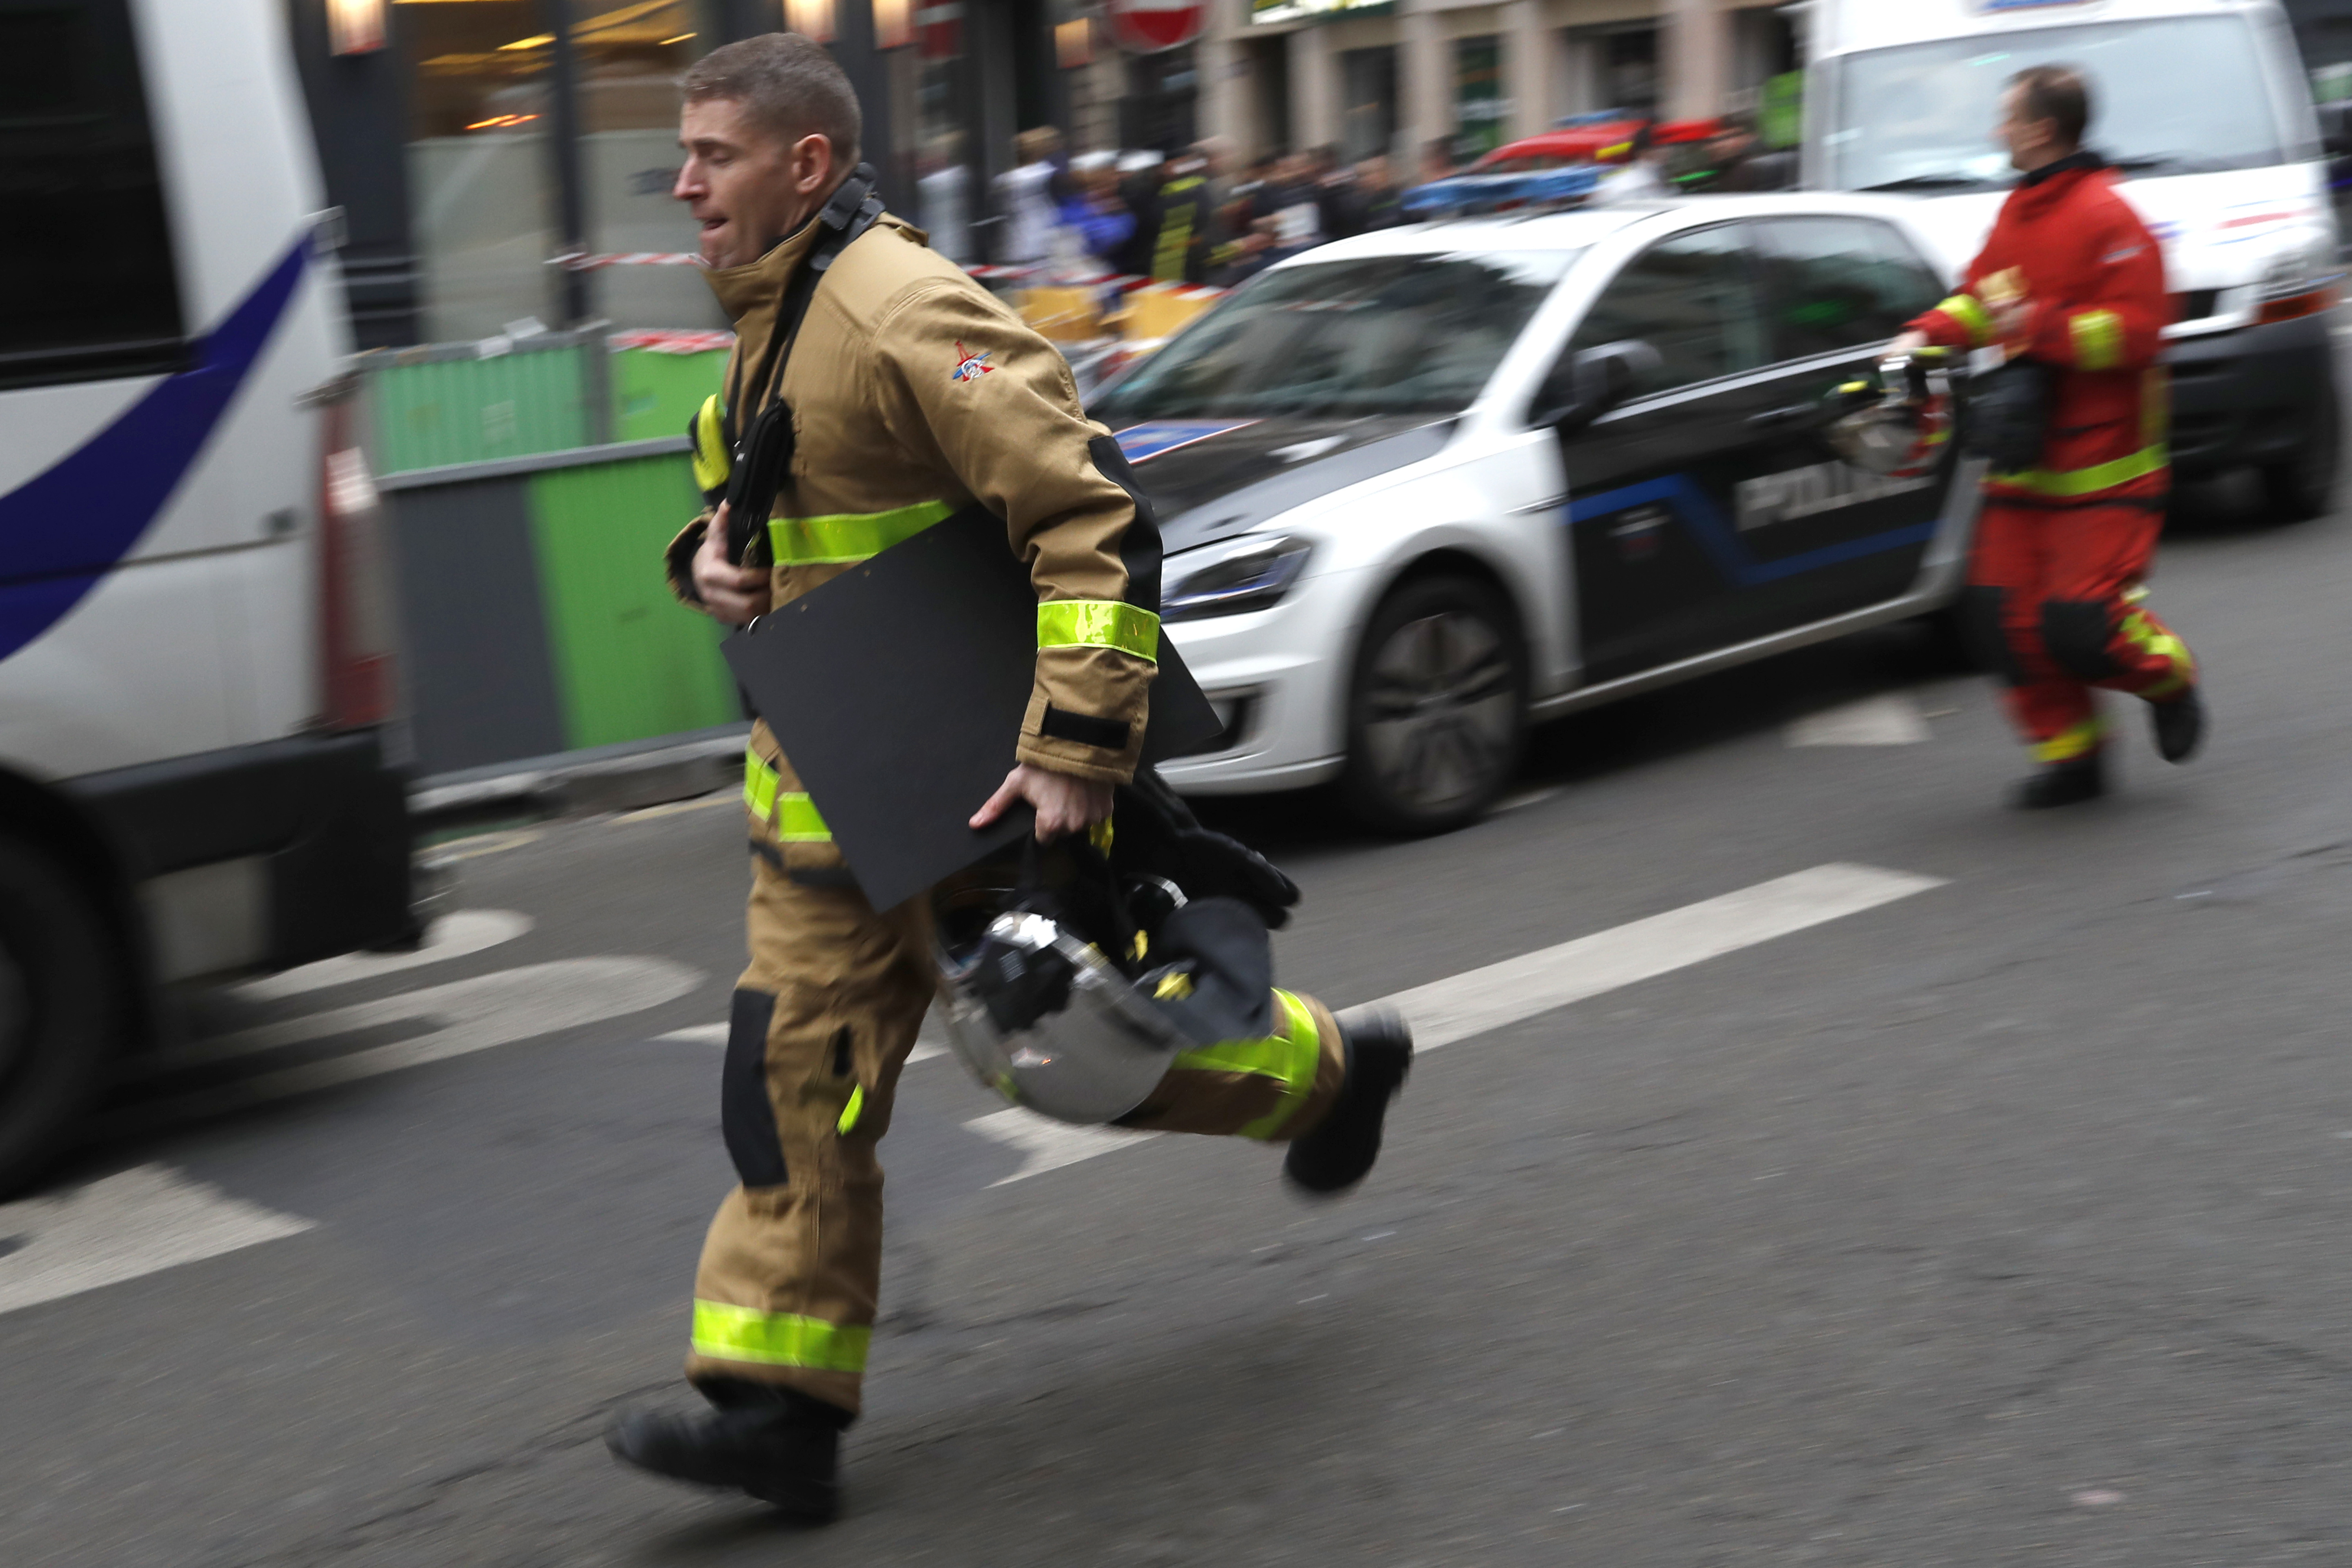 A firefighter rushes to the scene of a gas leak explosion in Paris, France, Saturday, Jan. 12, 2019. A powerful explosion and fire apparently caused by a gas leak at a Paris bakery Saturday injured several people, blasted out windows and overturned cars, police said. (AP Photo/Thibault Camus)